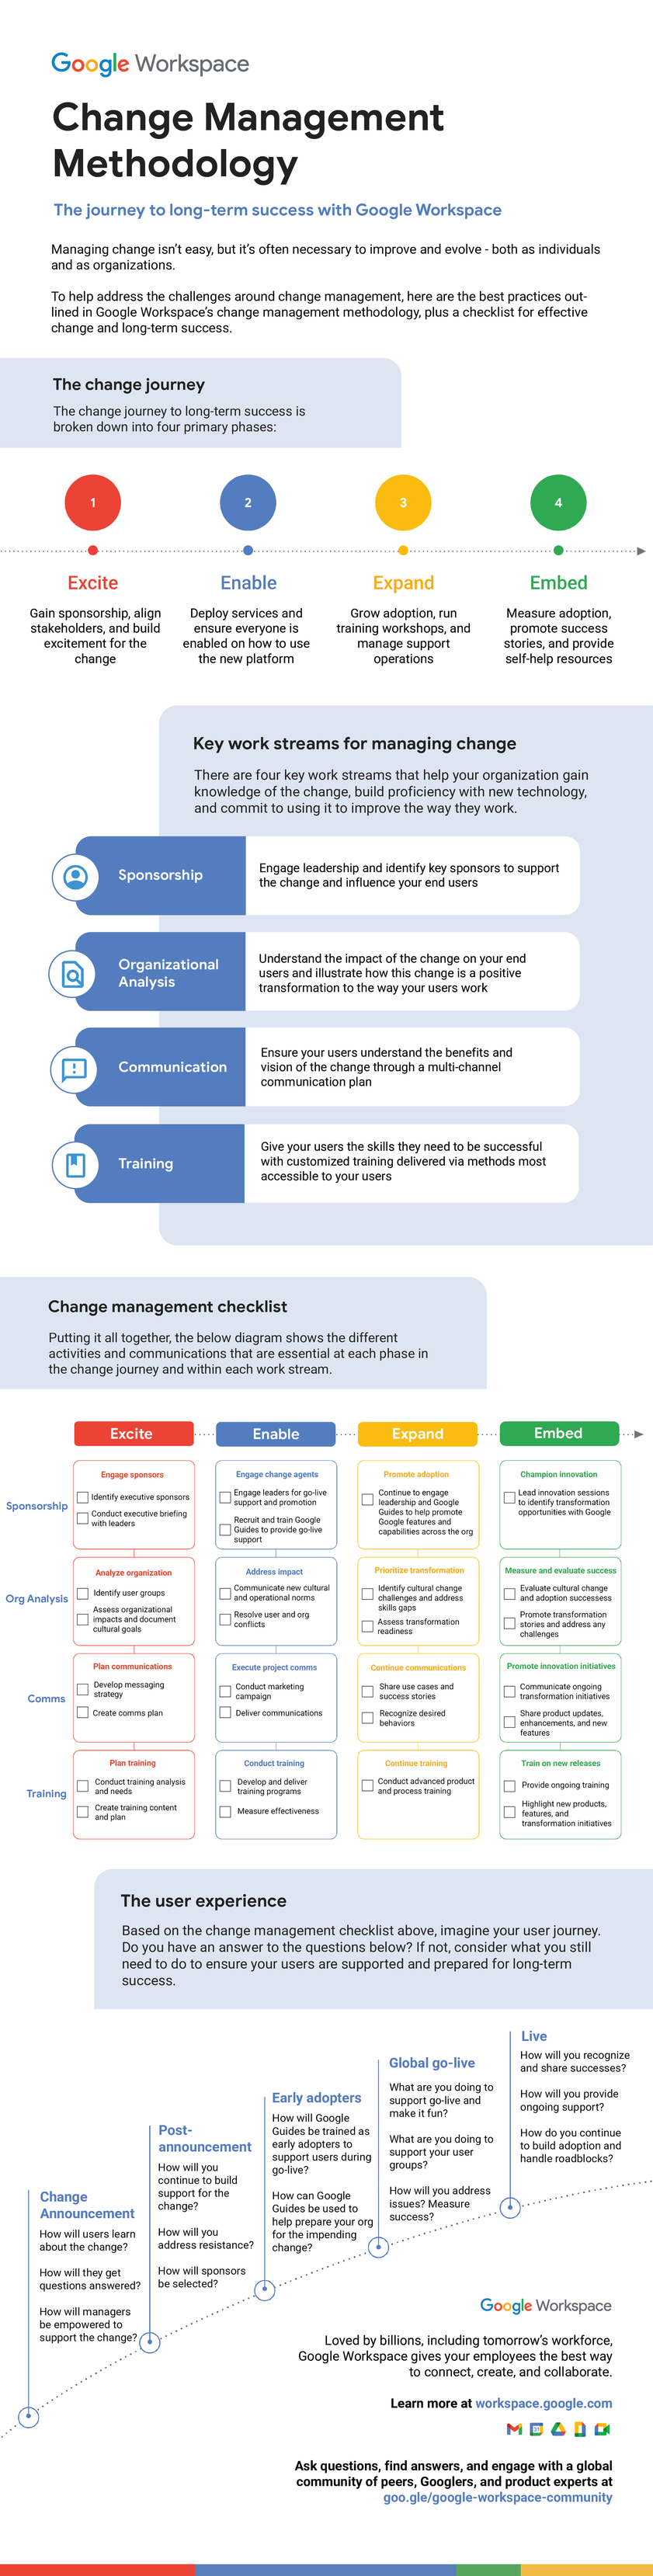 change-management-gws-guide.png